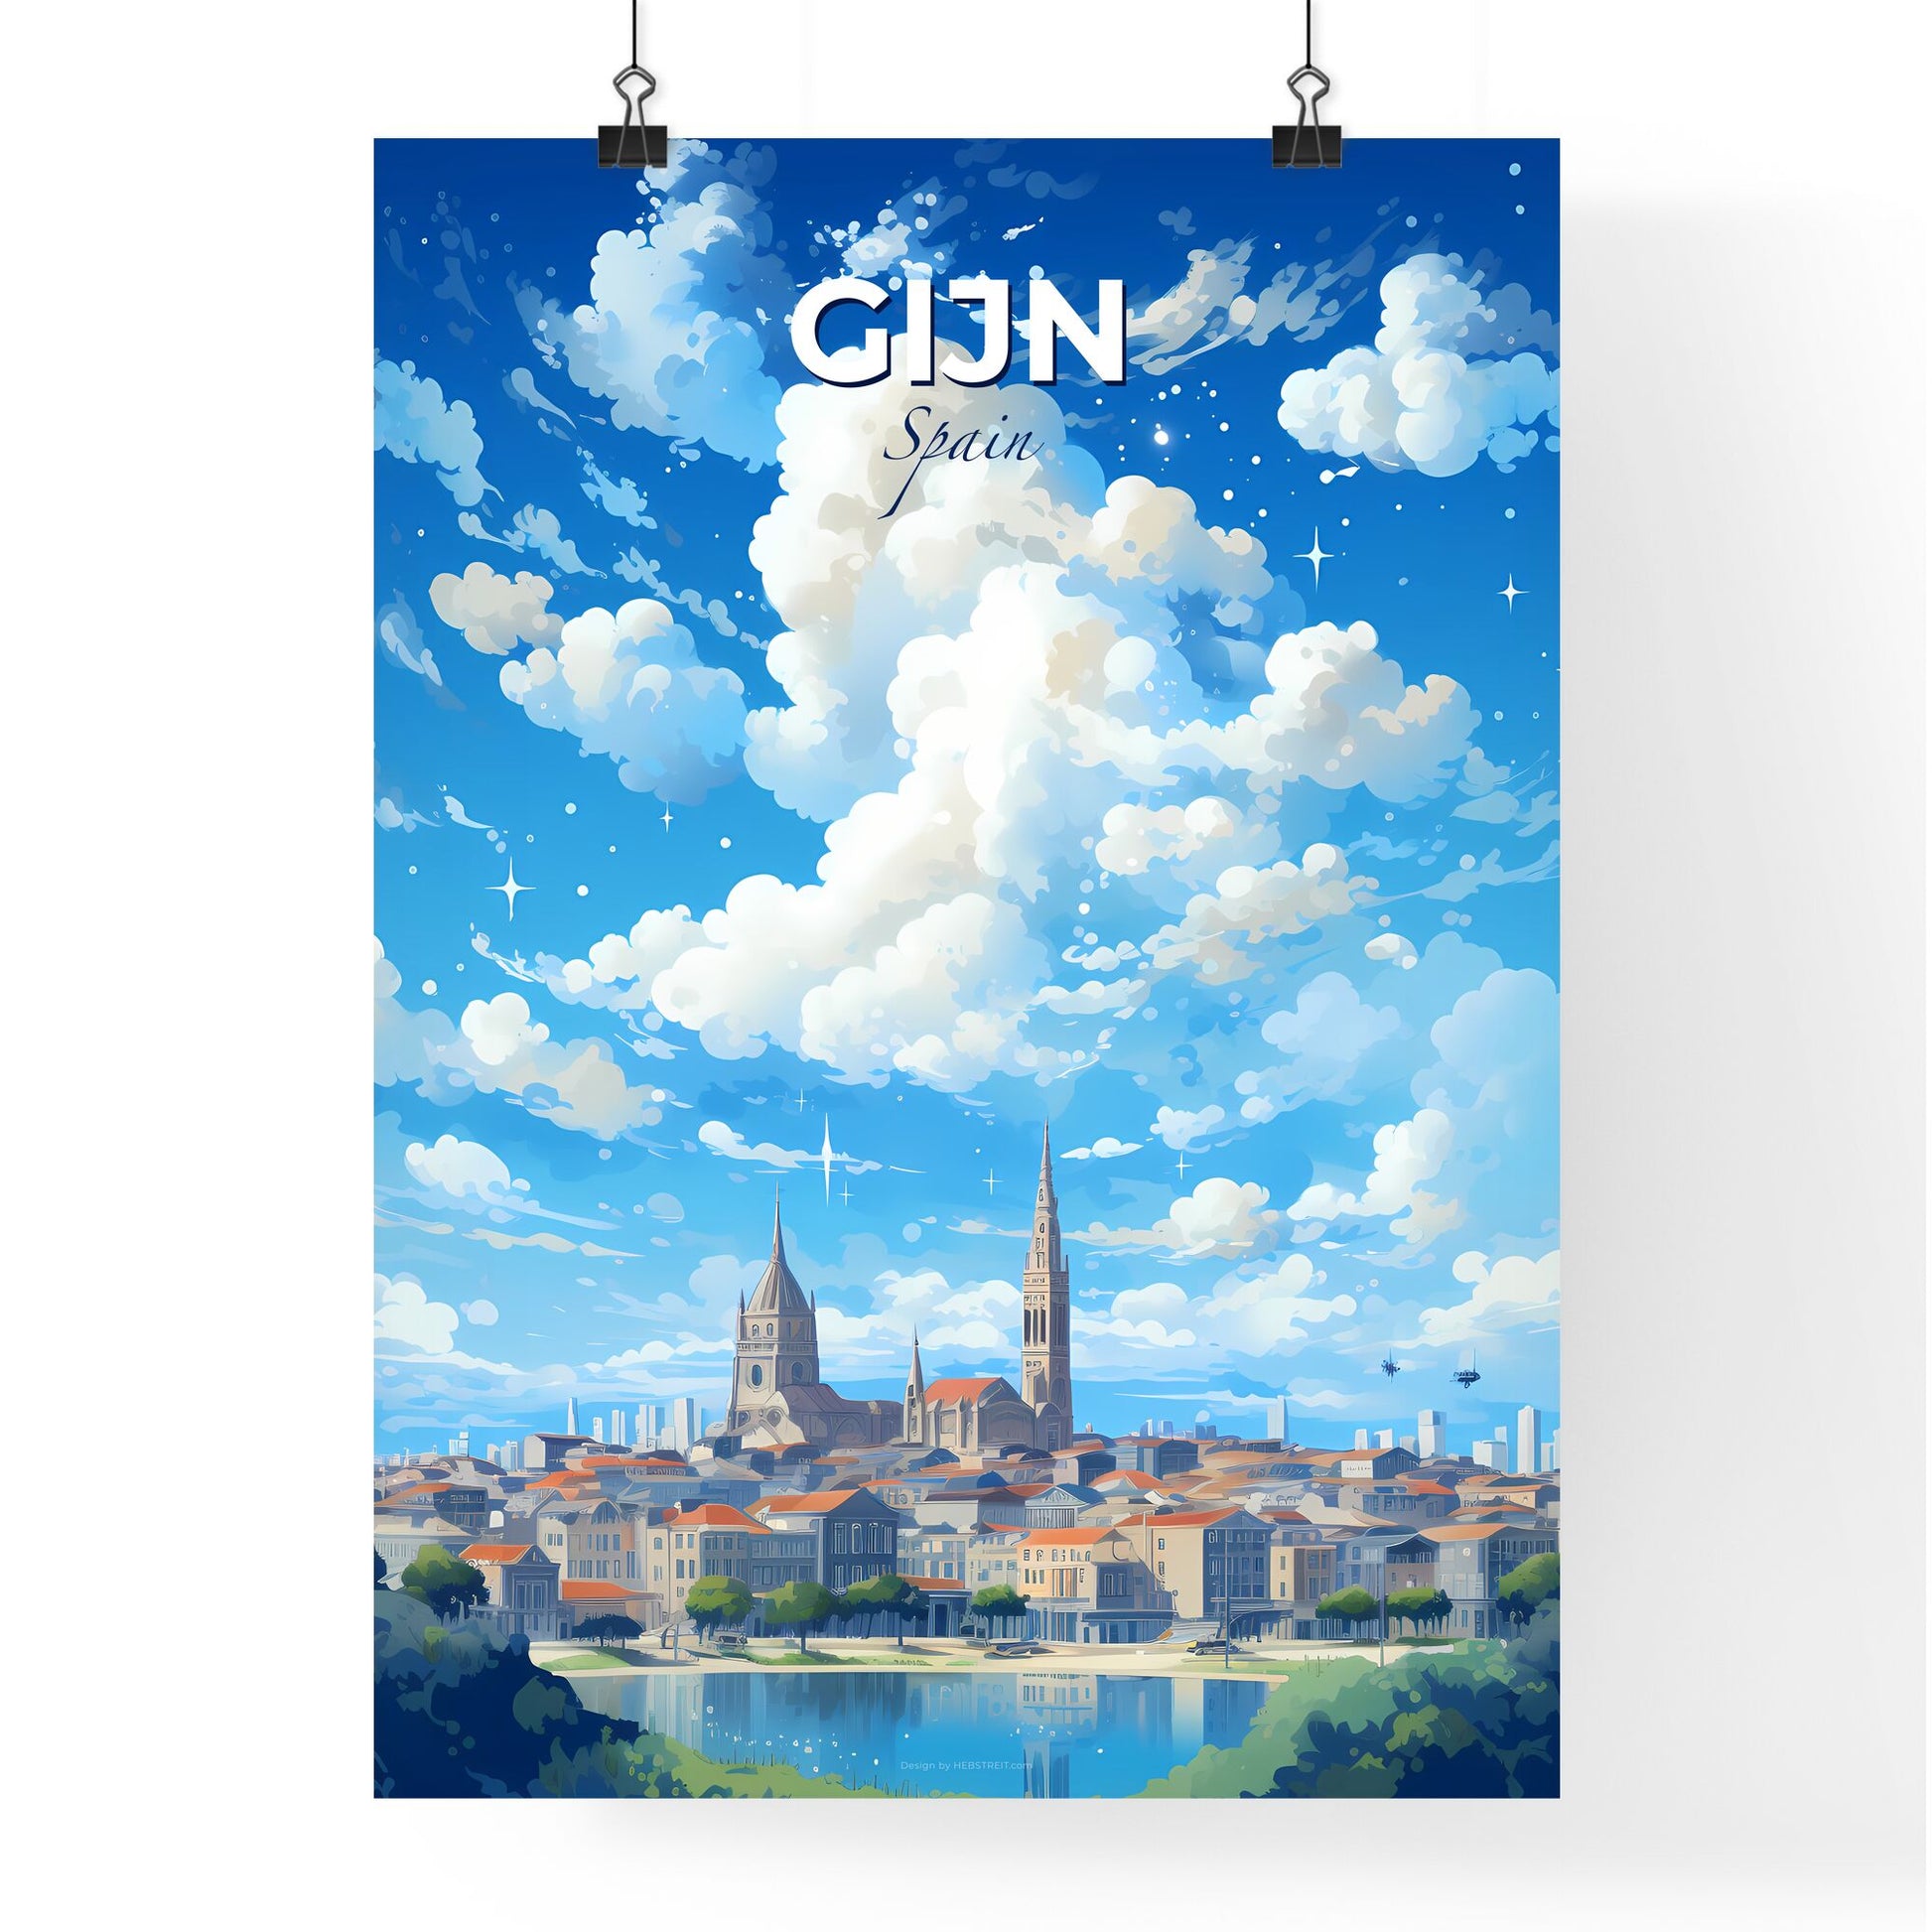 Gijn Spain Skyline - A City With A Large Building And A Large Tower - Customizable Travel Gift Default Title